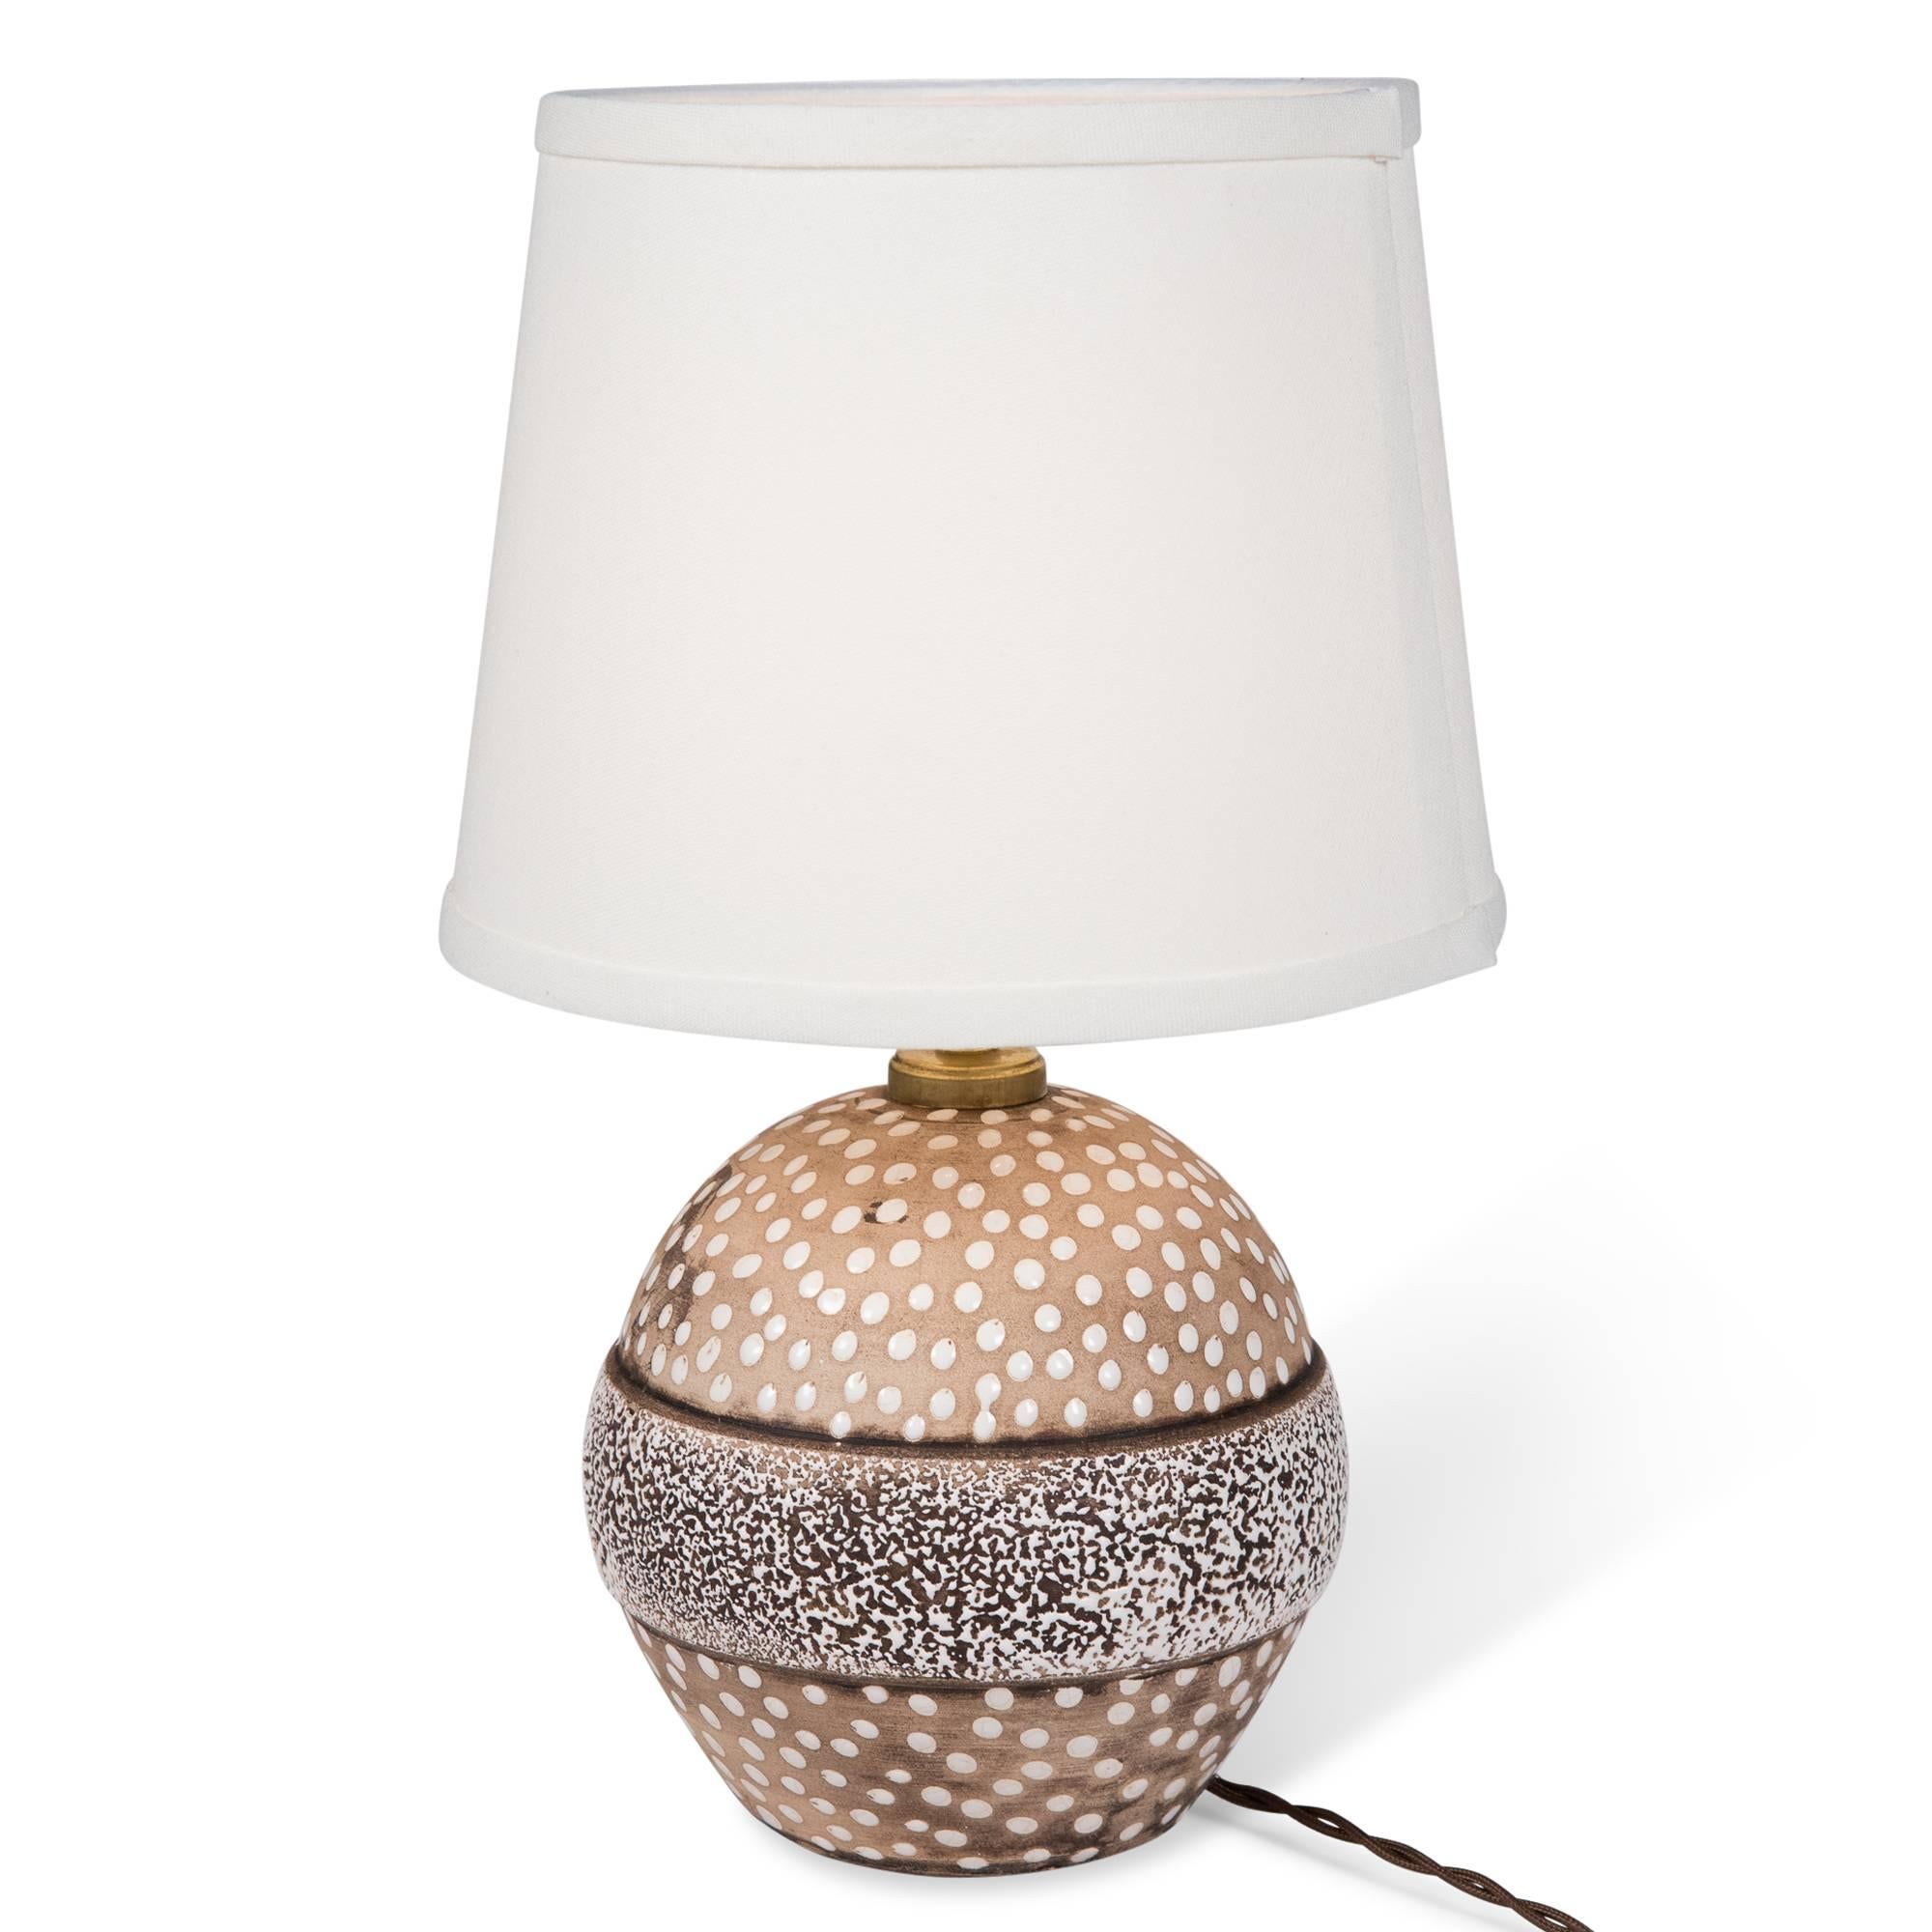 Glazed Spotted Ceramic Table Lamp by Louis Dage, French, 1930s In Excellent Condition For Sale In Brooklyn, NY